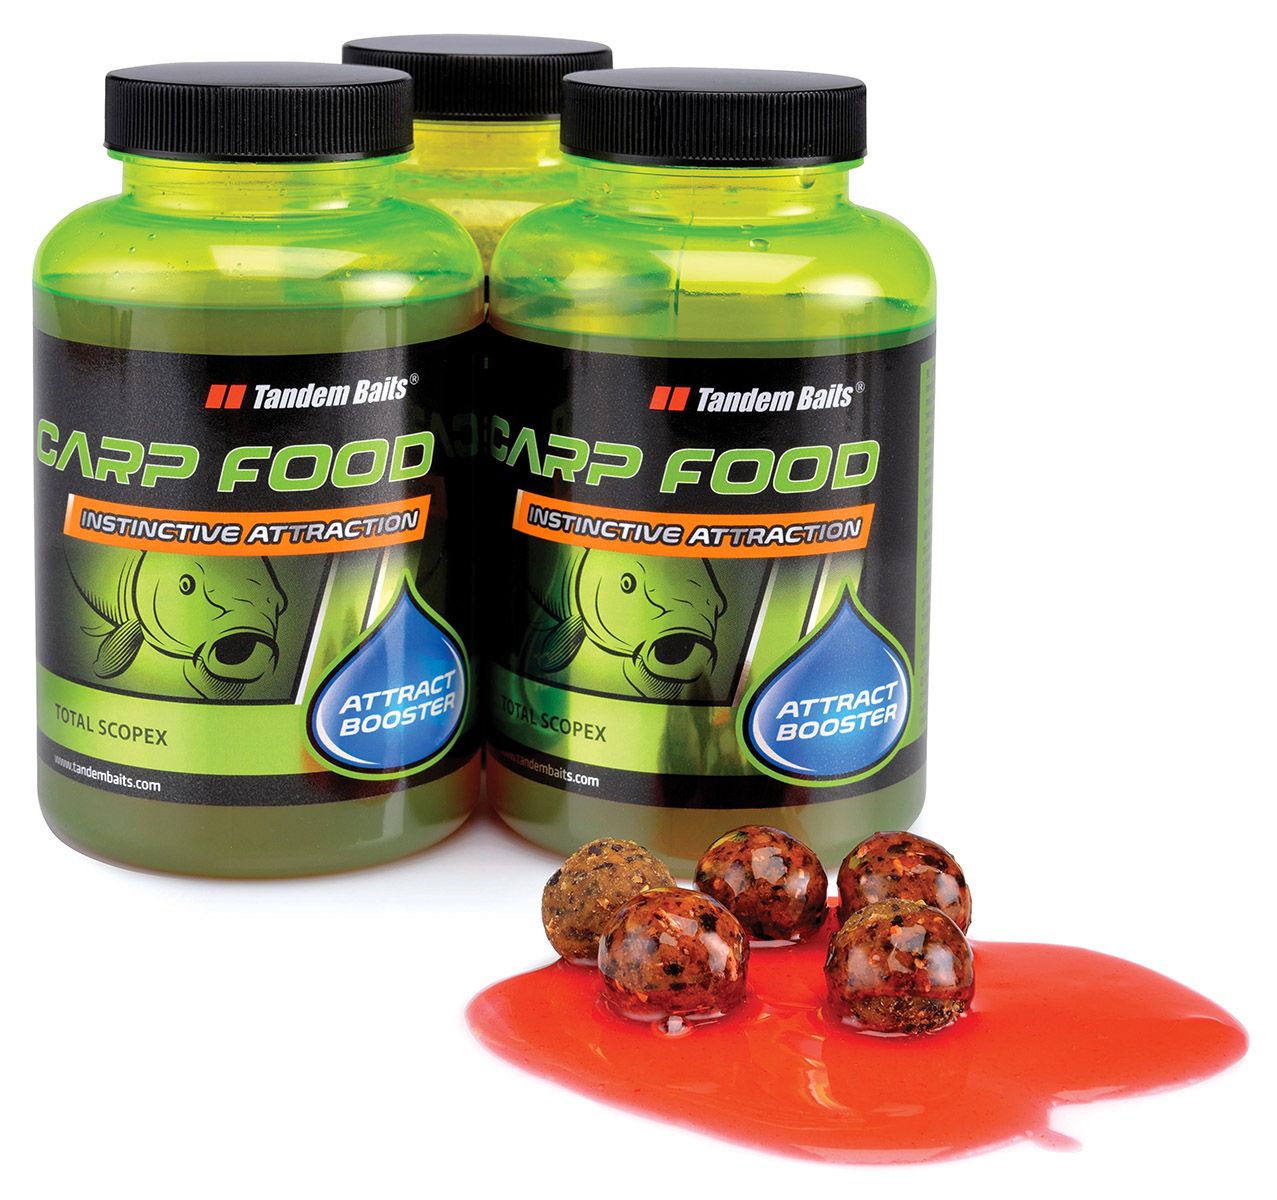 Carp Food Attract Booster